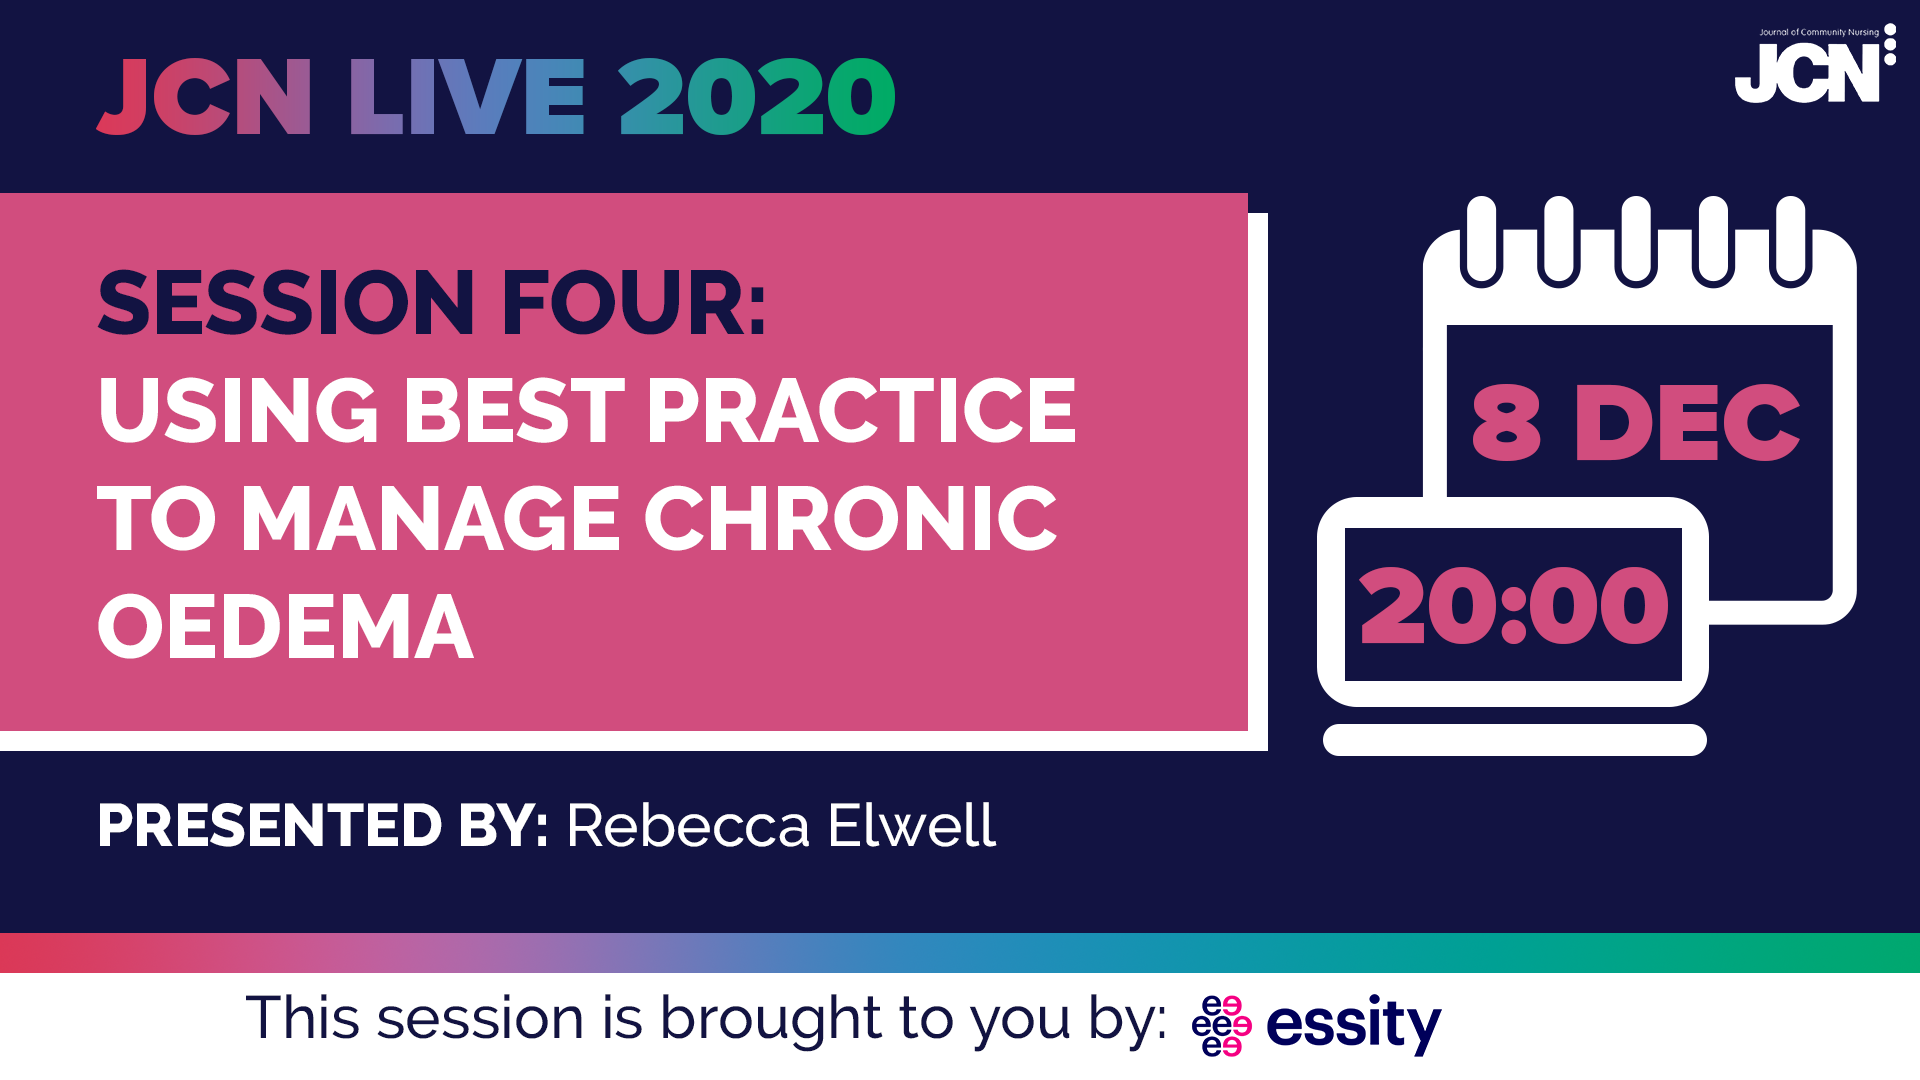 JCN LIVE 2020 - USING BEST PRACTICE TO MANAGE CHRONIC OEDEMA